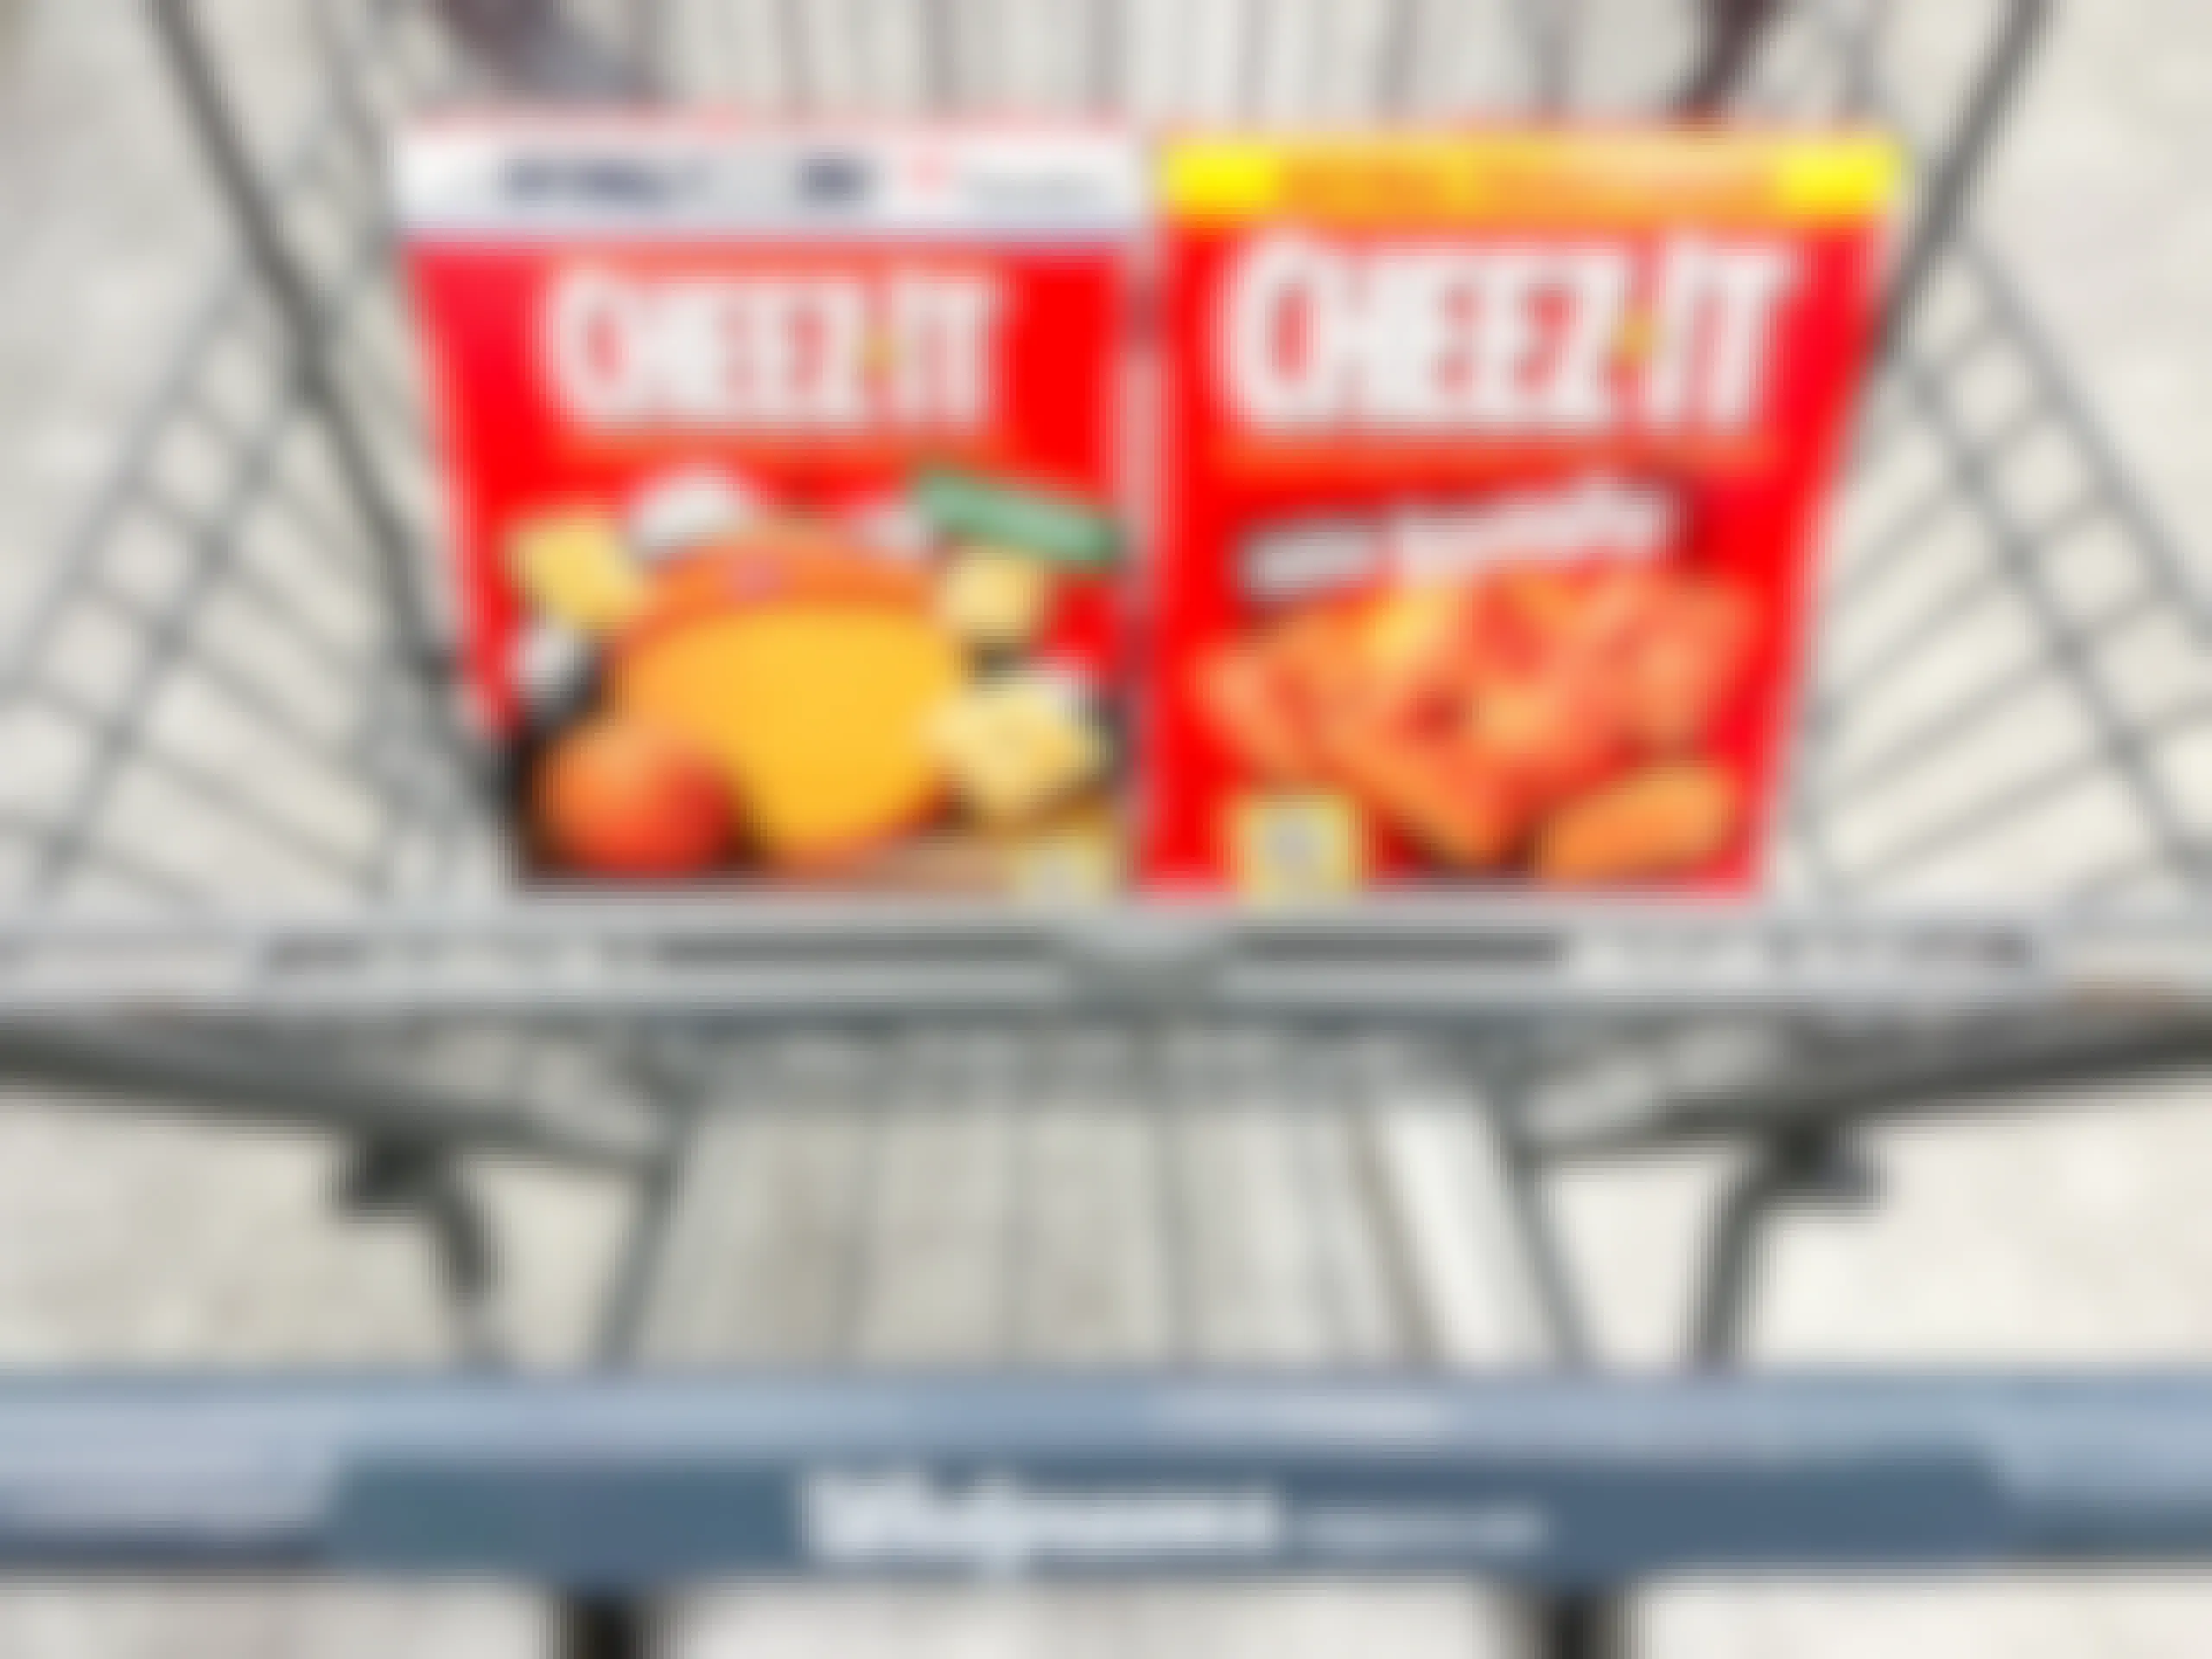 two cheez it crackers in shopping cart